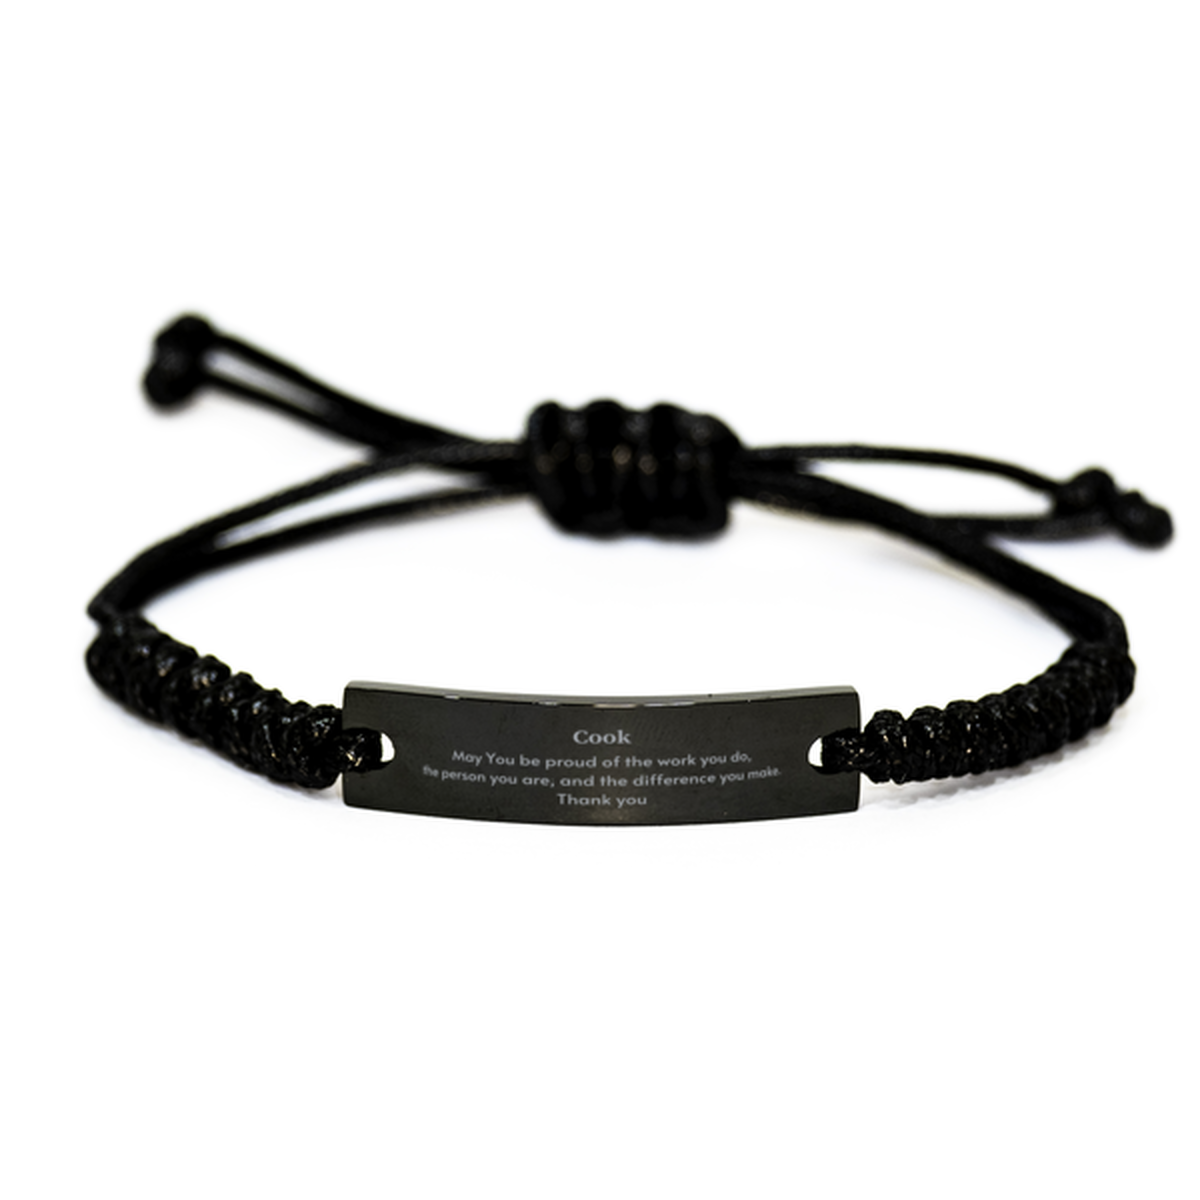 Heartwarming Black Rope Bracelet Retirement Coworkers Gifts for Cook, Cook May You be proud of the work you do, the person you are Gifts for Boss Men Women Friends